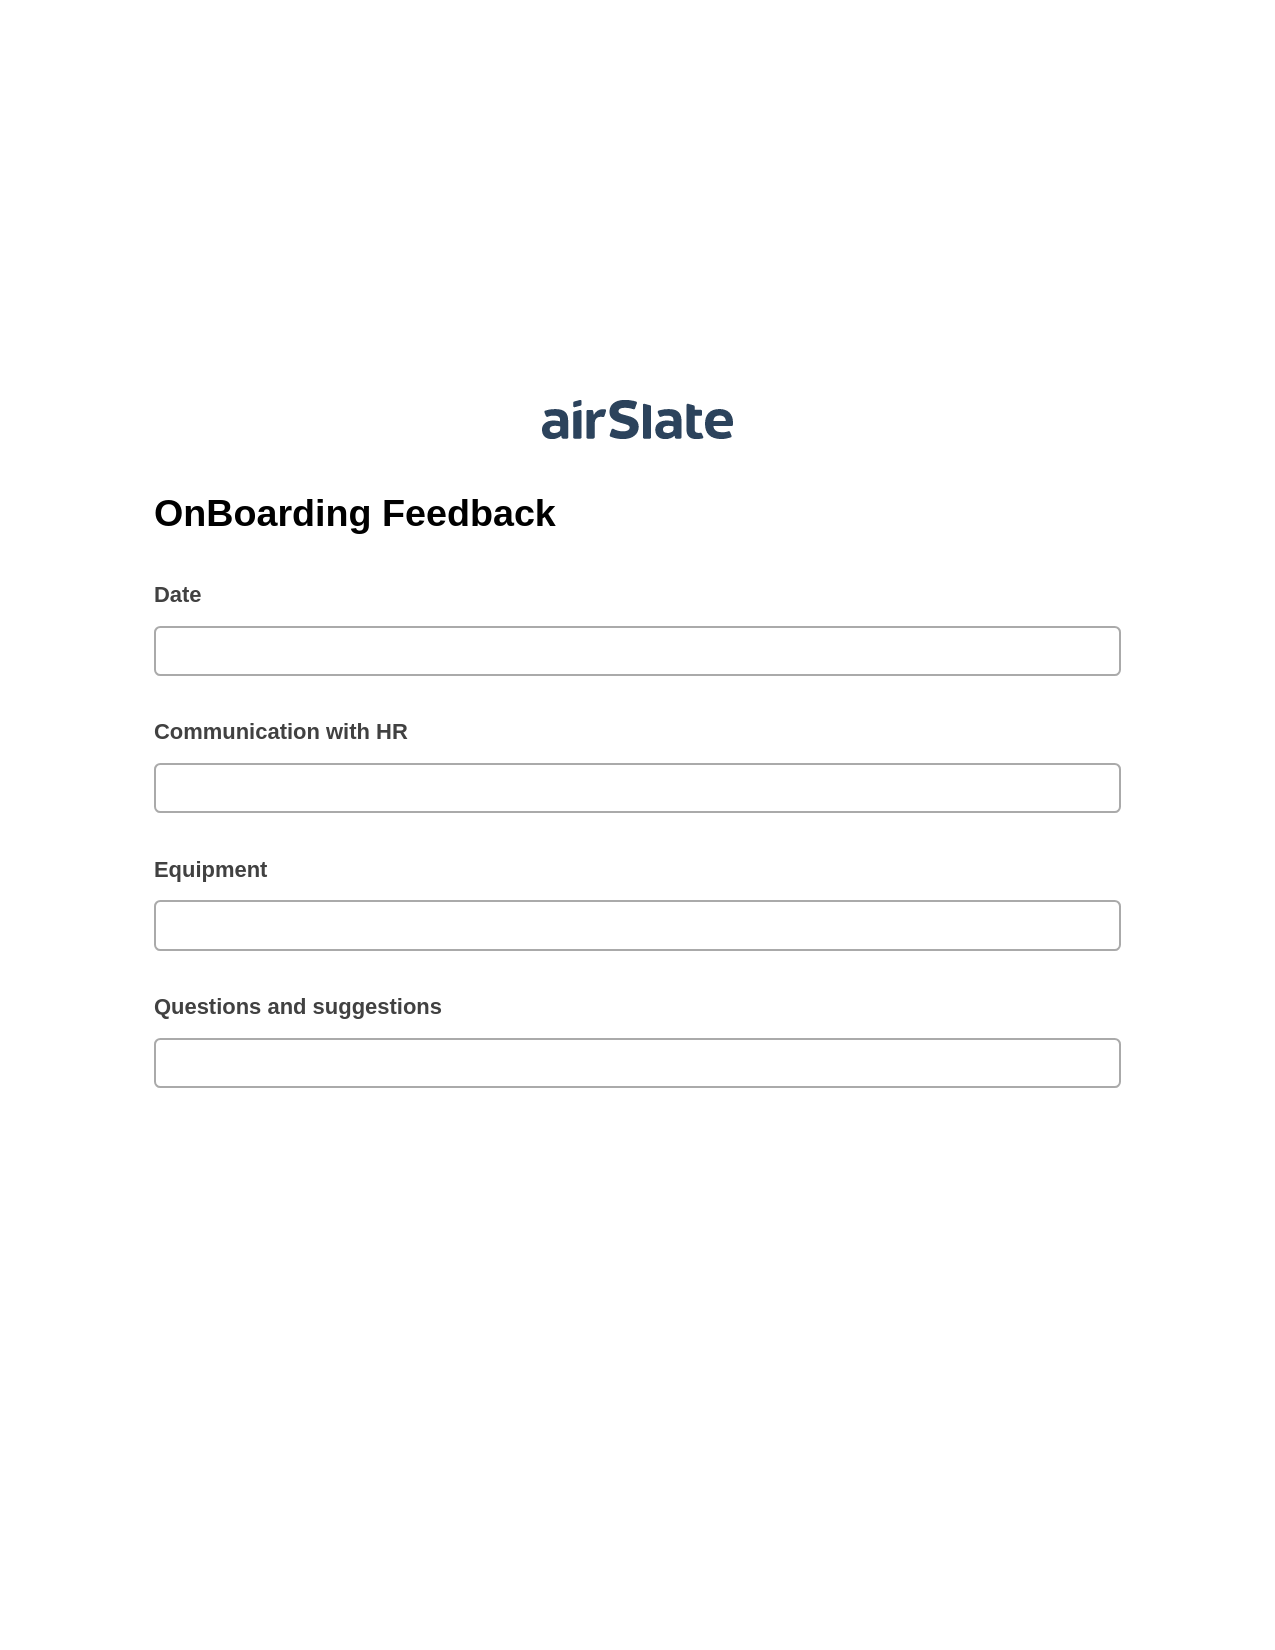 OnBoarding Feedback Pre-fill Slate from MS Dynamics 365 Records Bot, Remove Slate Bot, Export to Formstack Documents Bot